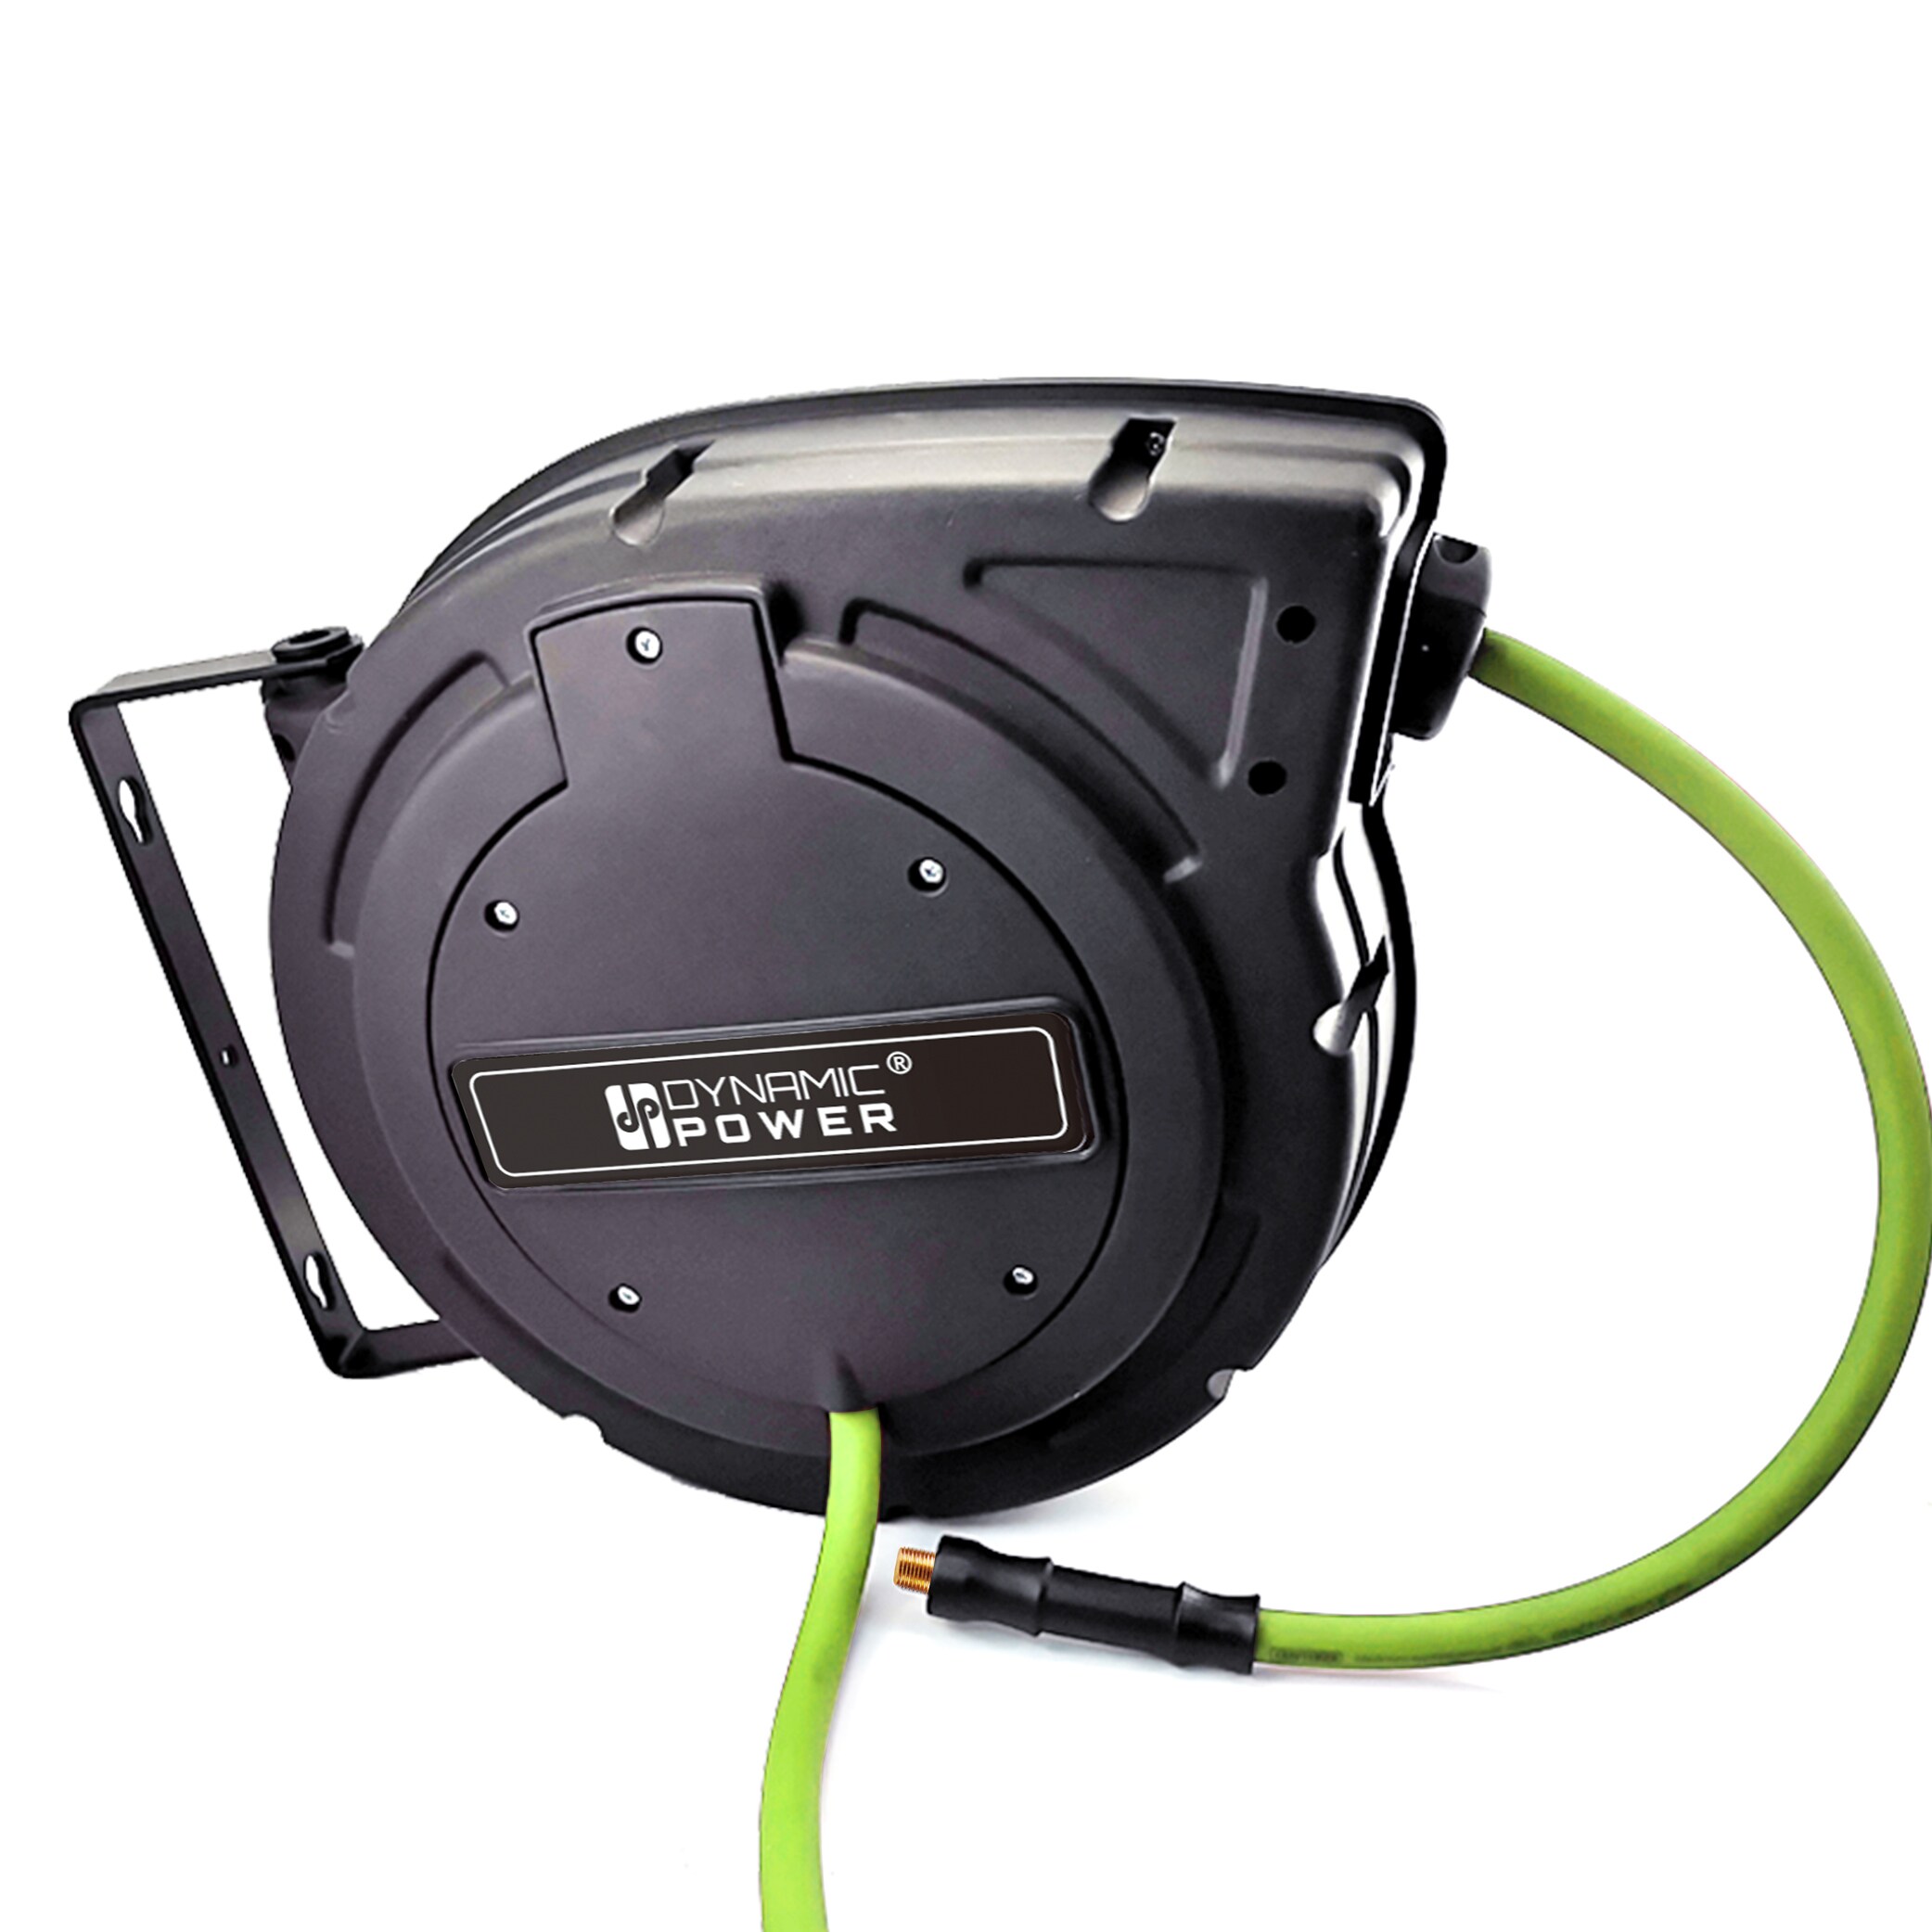 DYNAMIC POWER 50 Ft Enclosed Retractable Air Hose Reel (Hybrid Hose) in the Air  Compressor Hoses department at